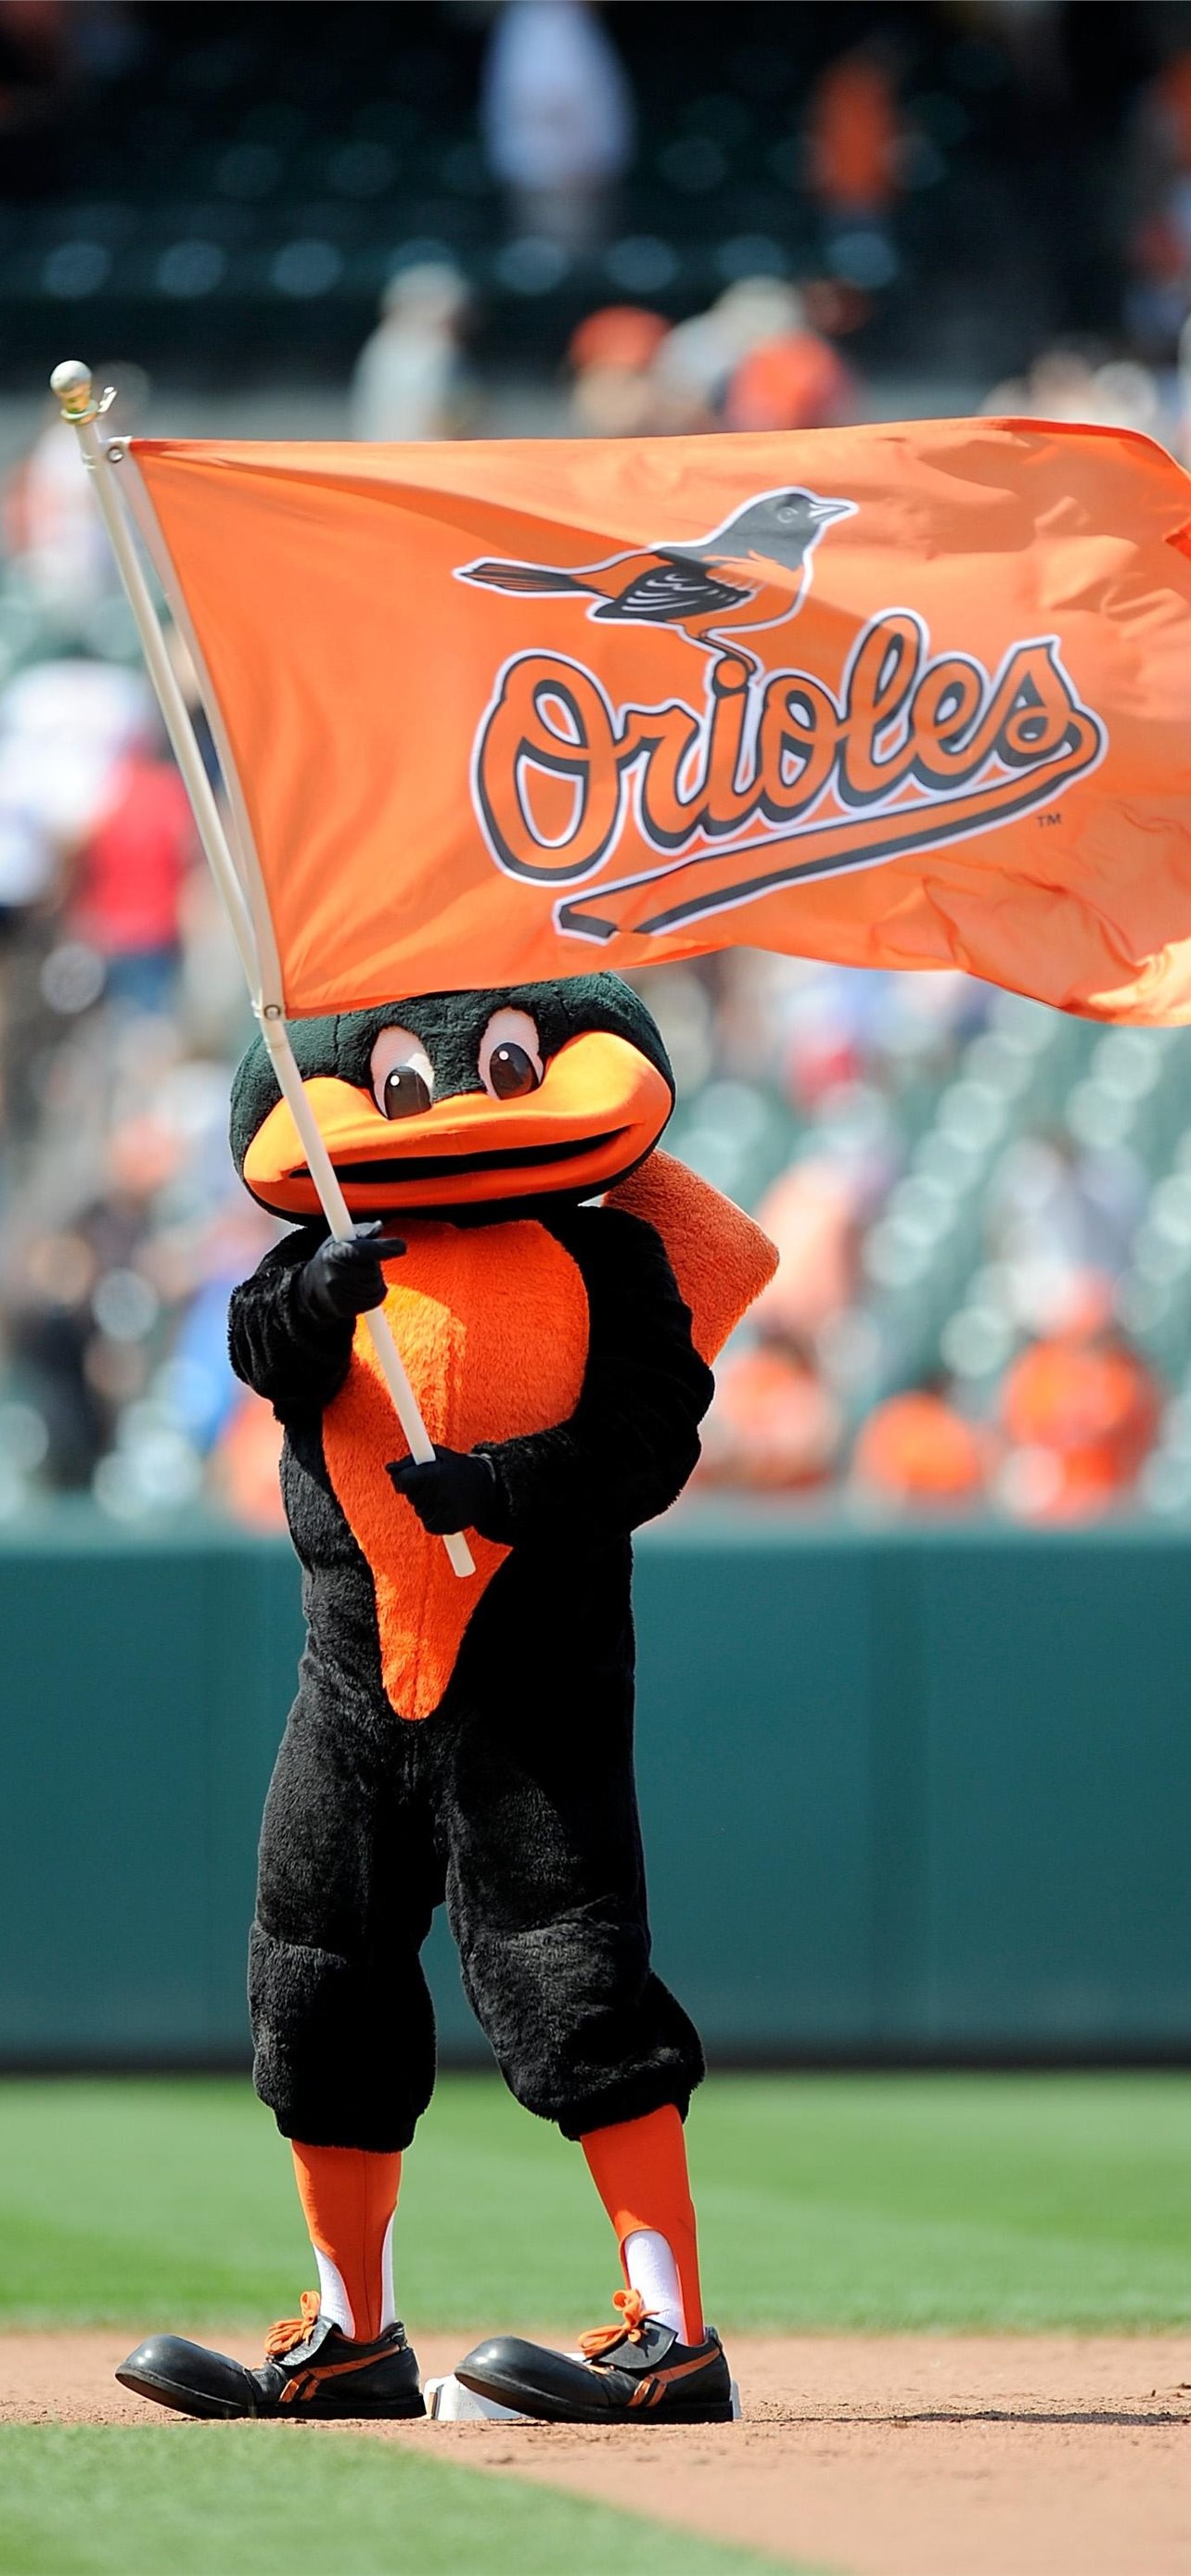 Baltimore Orioles, Sports team, iPhone wallpapers, Team logo, 1290x2780 HD Handy